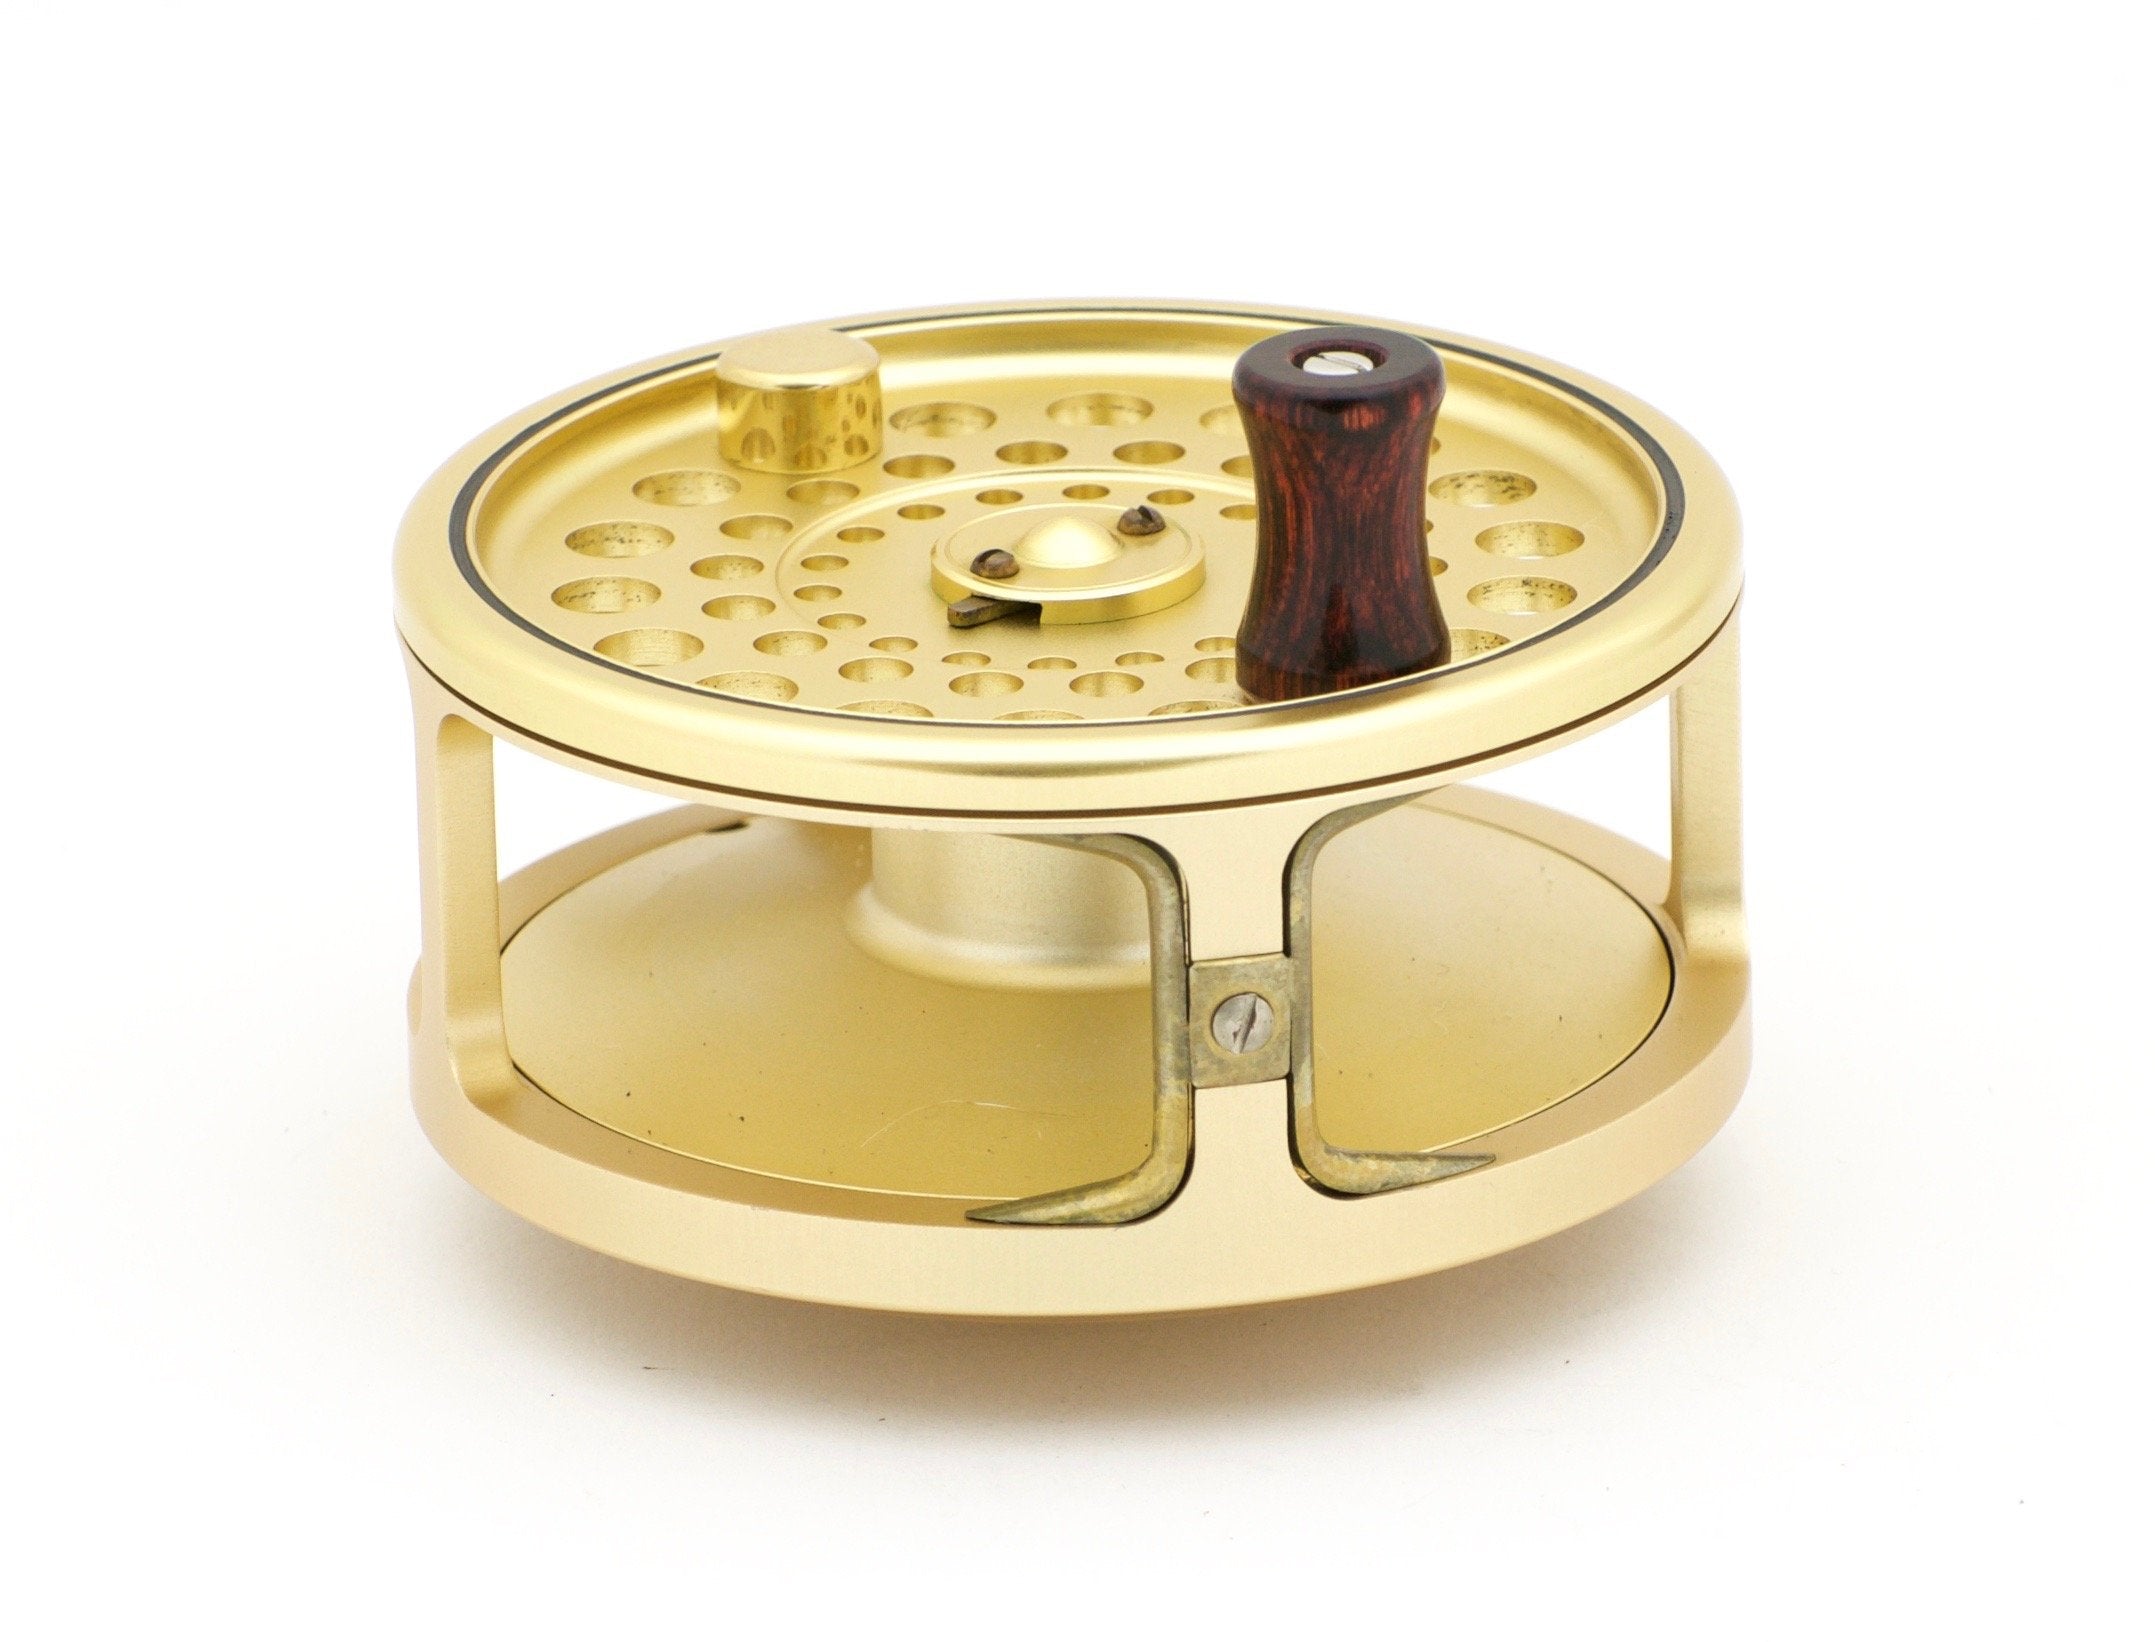 Hardy Sovereign Fly Reel